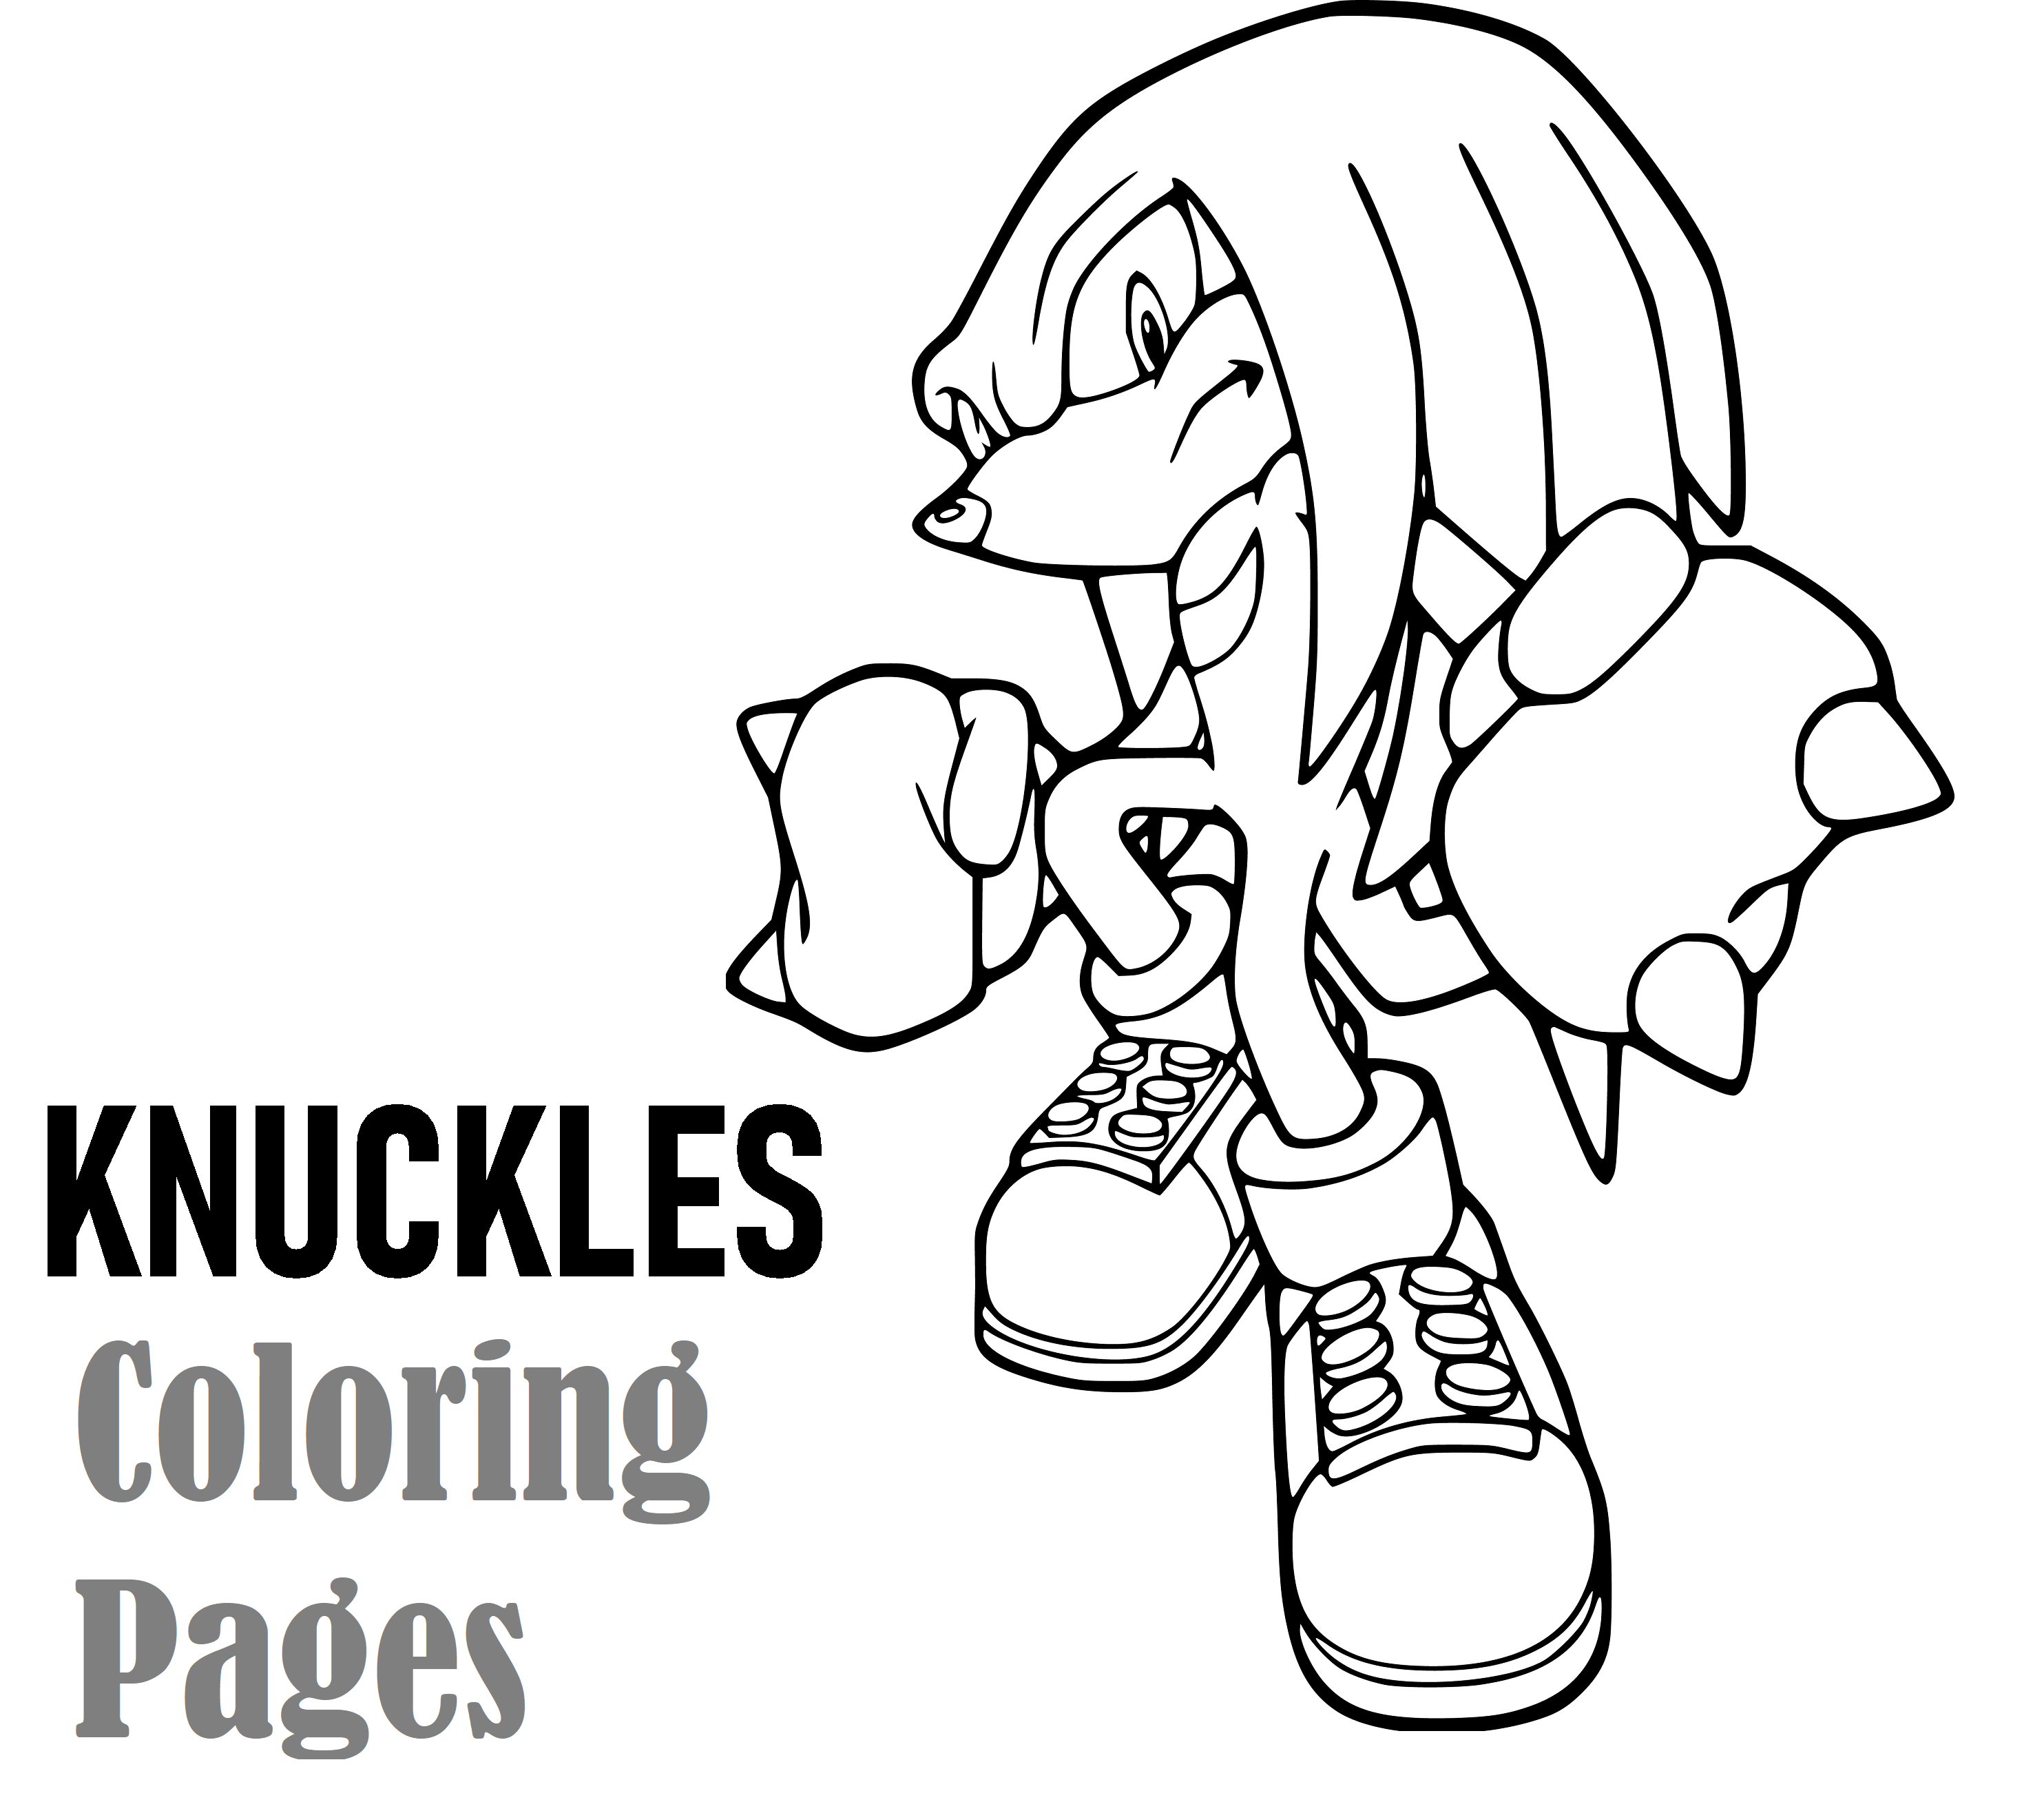 Knuckles Coloring Page 2